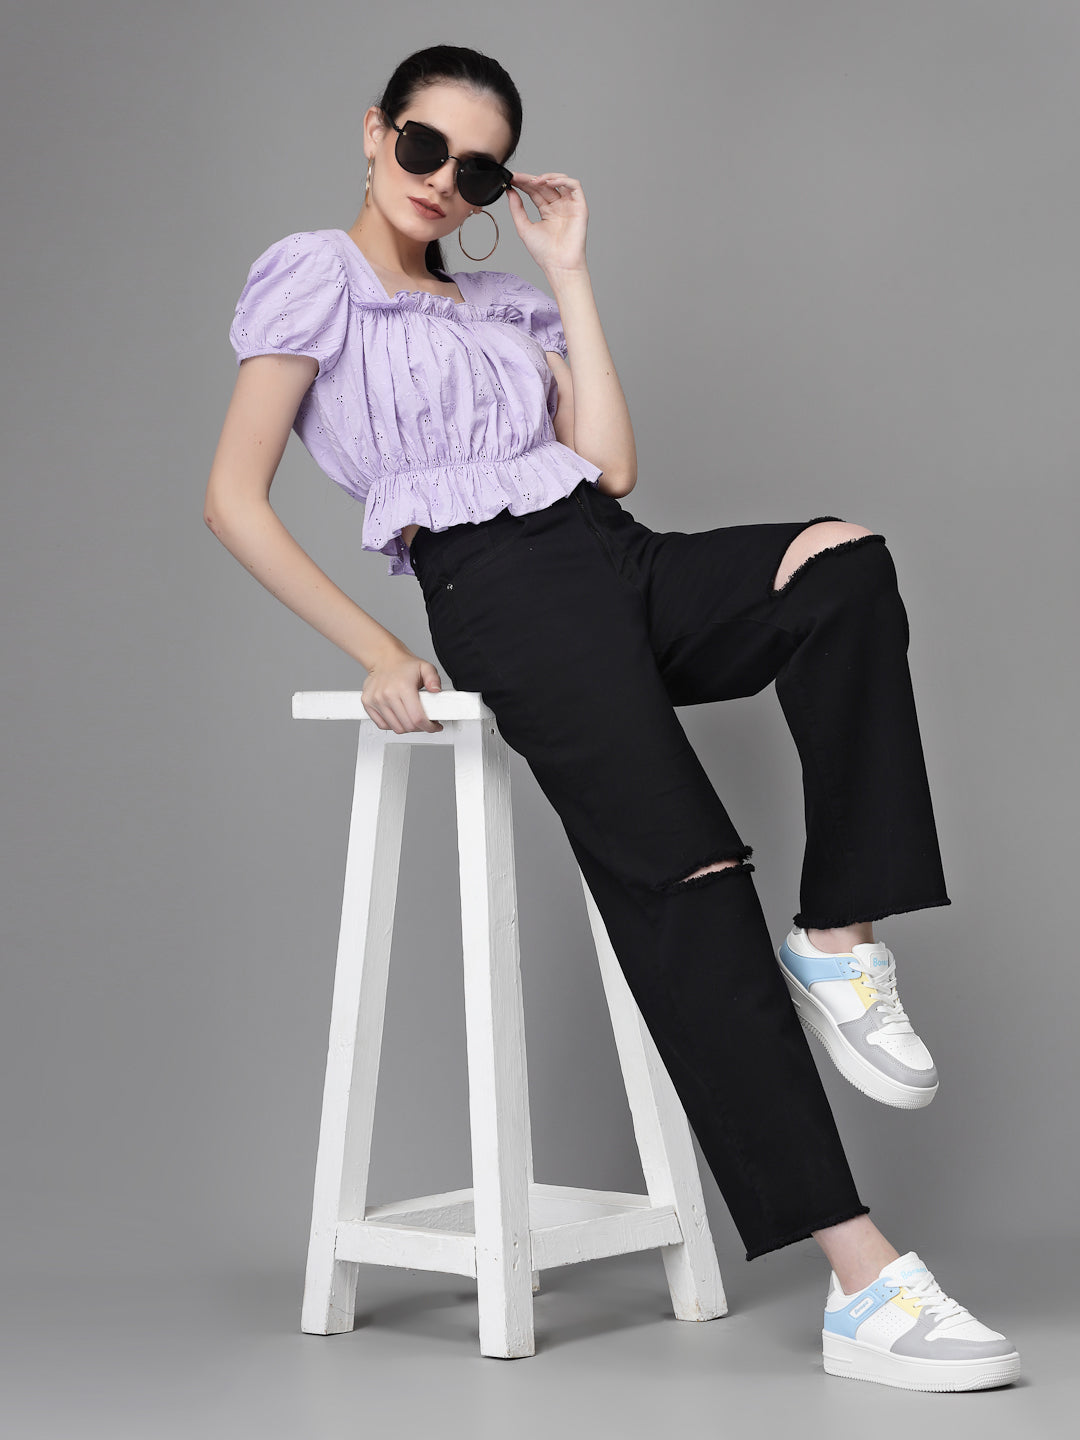 Women Lilac Square Neck Puffed Blouse Top